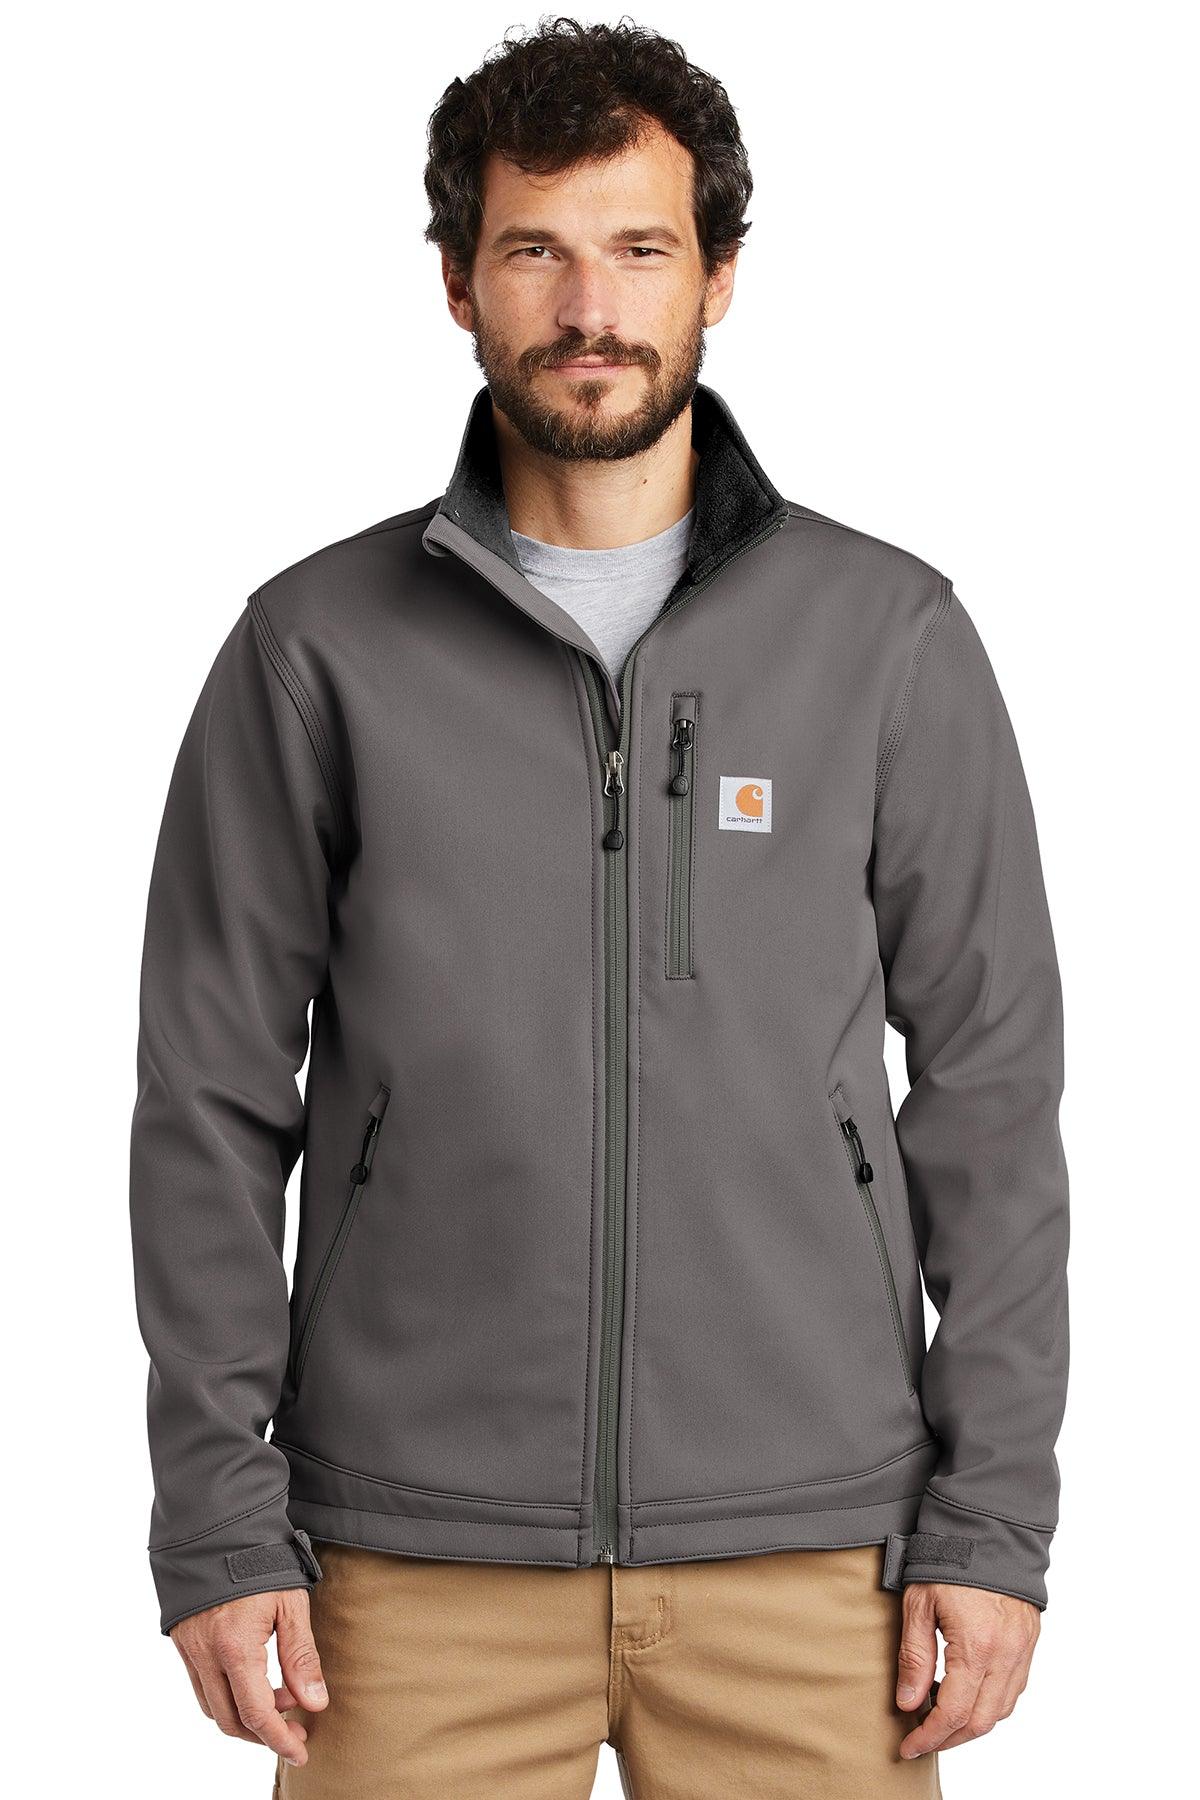 Crowley Soft Shell Jacket - Charcoal - Purpose-Built / Home of the Trades